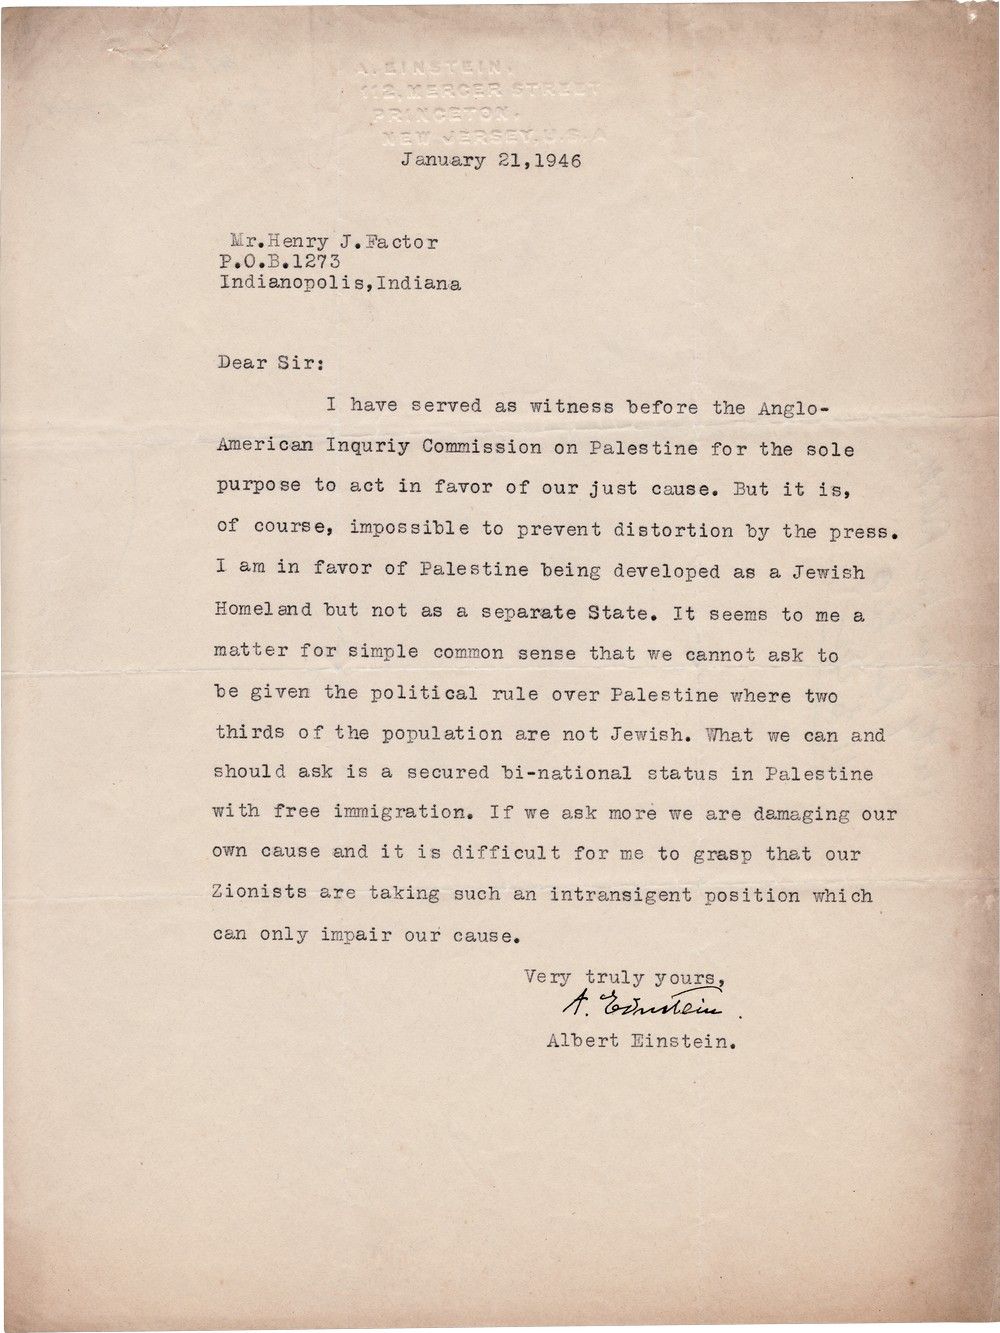 Einstein on Zionism: He is for a Jewish Homeland, But Not a Separate State